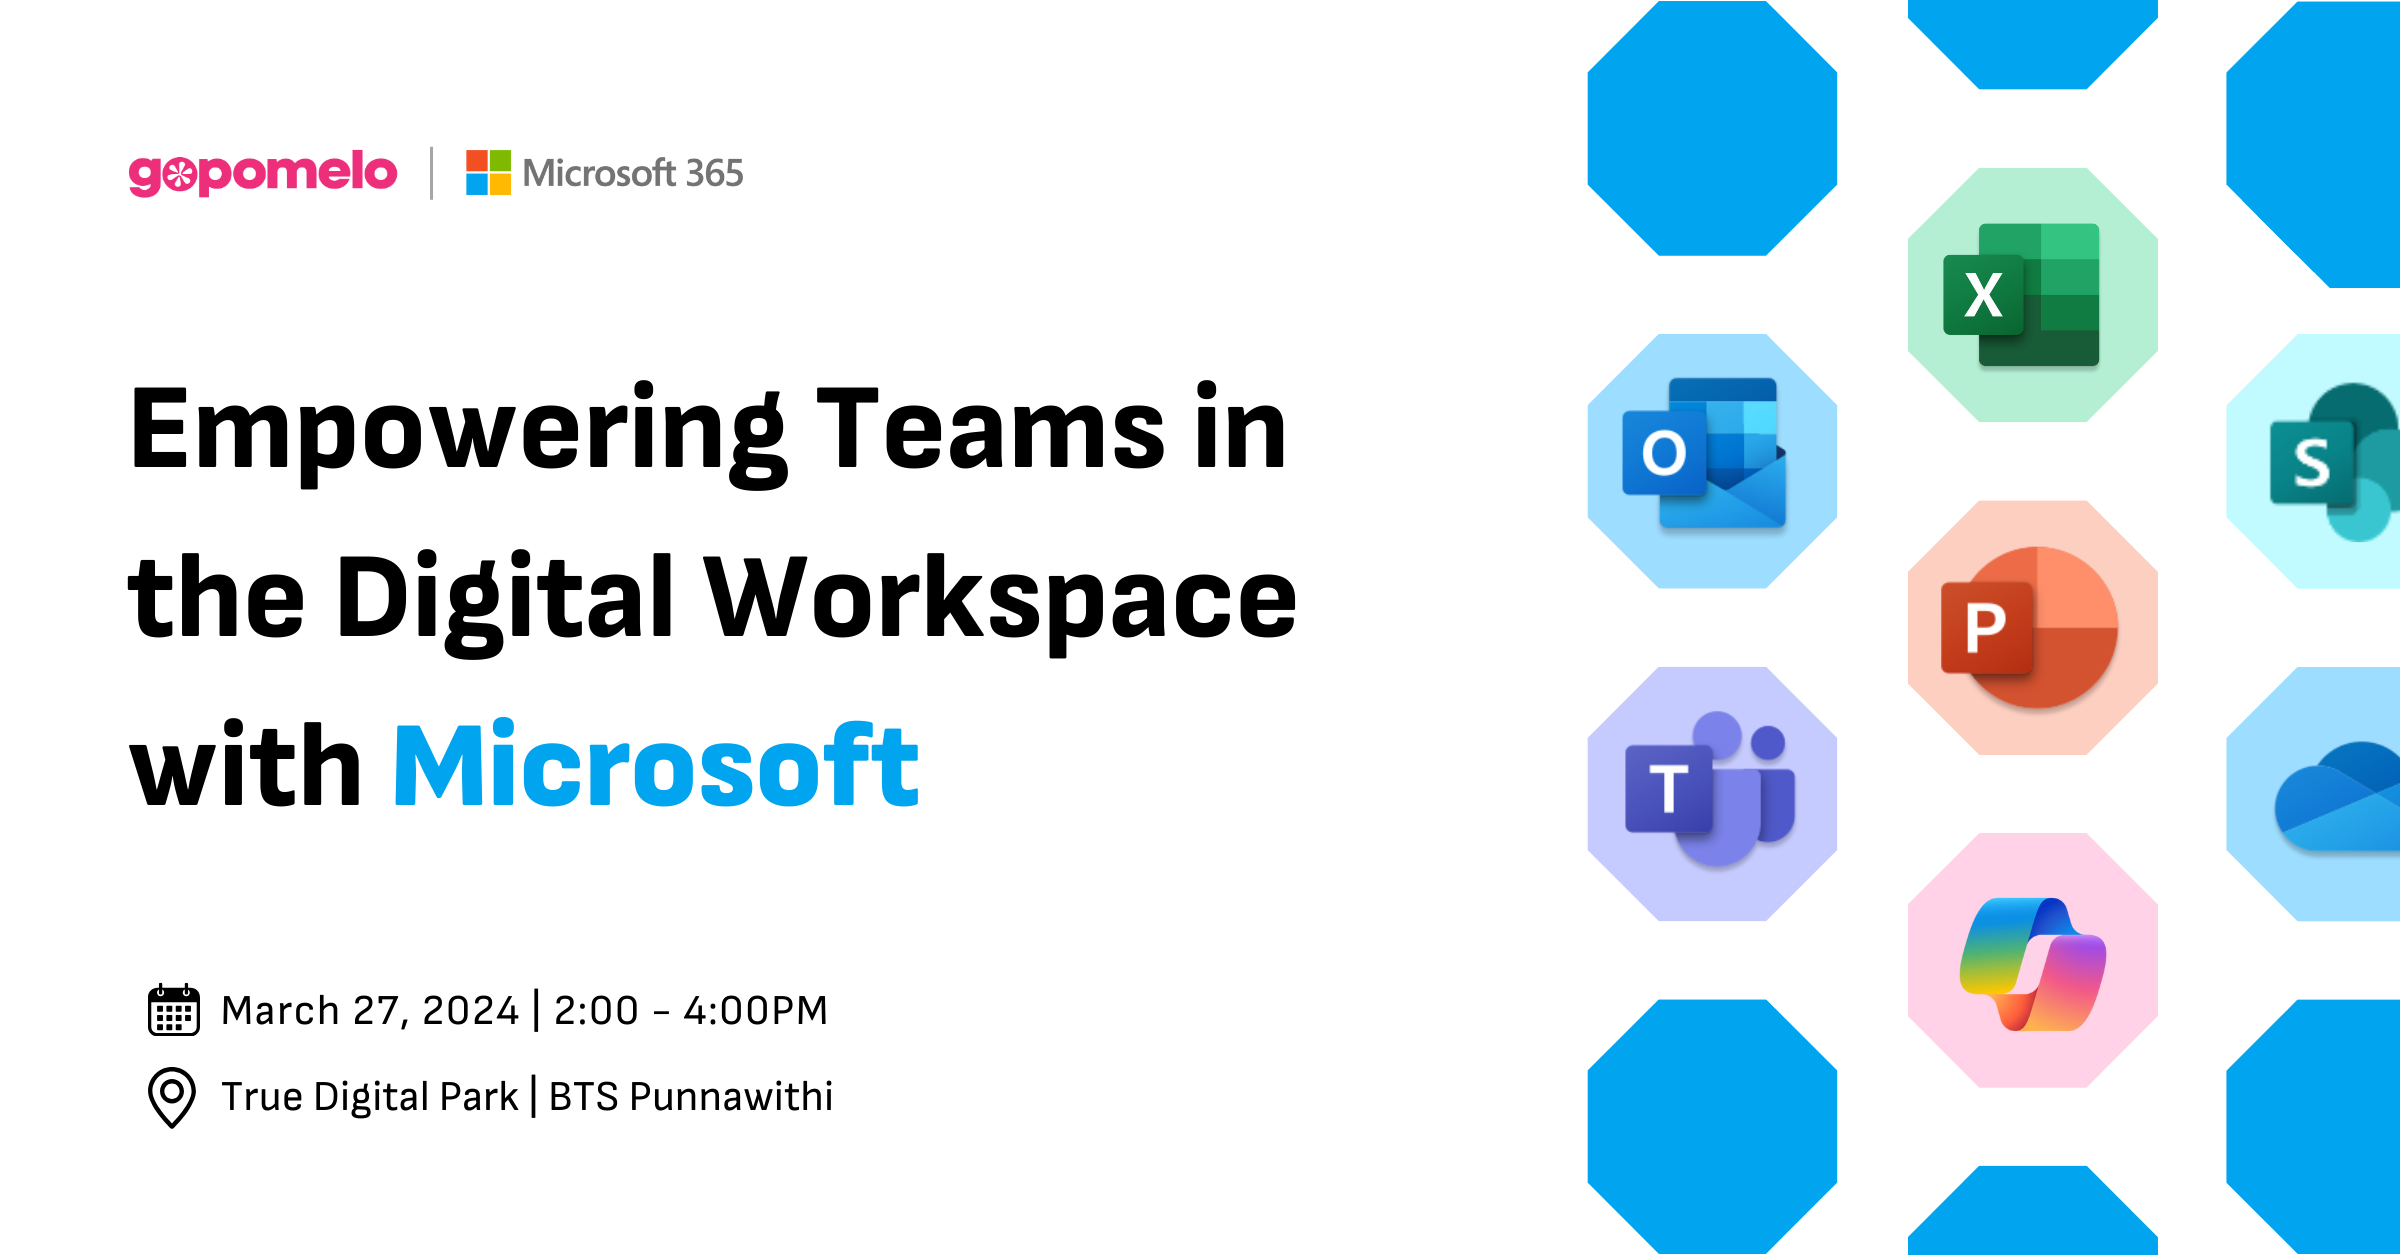 Empowering Teams in the Digital Workspace with Microsoft